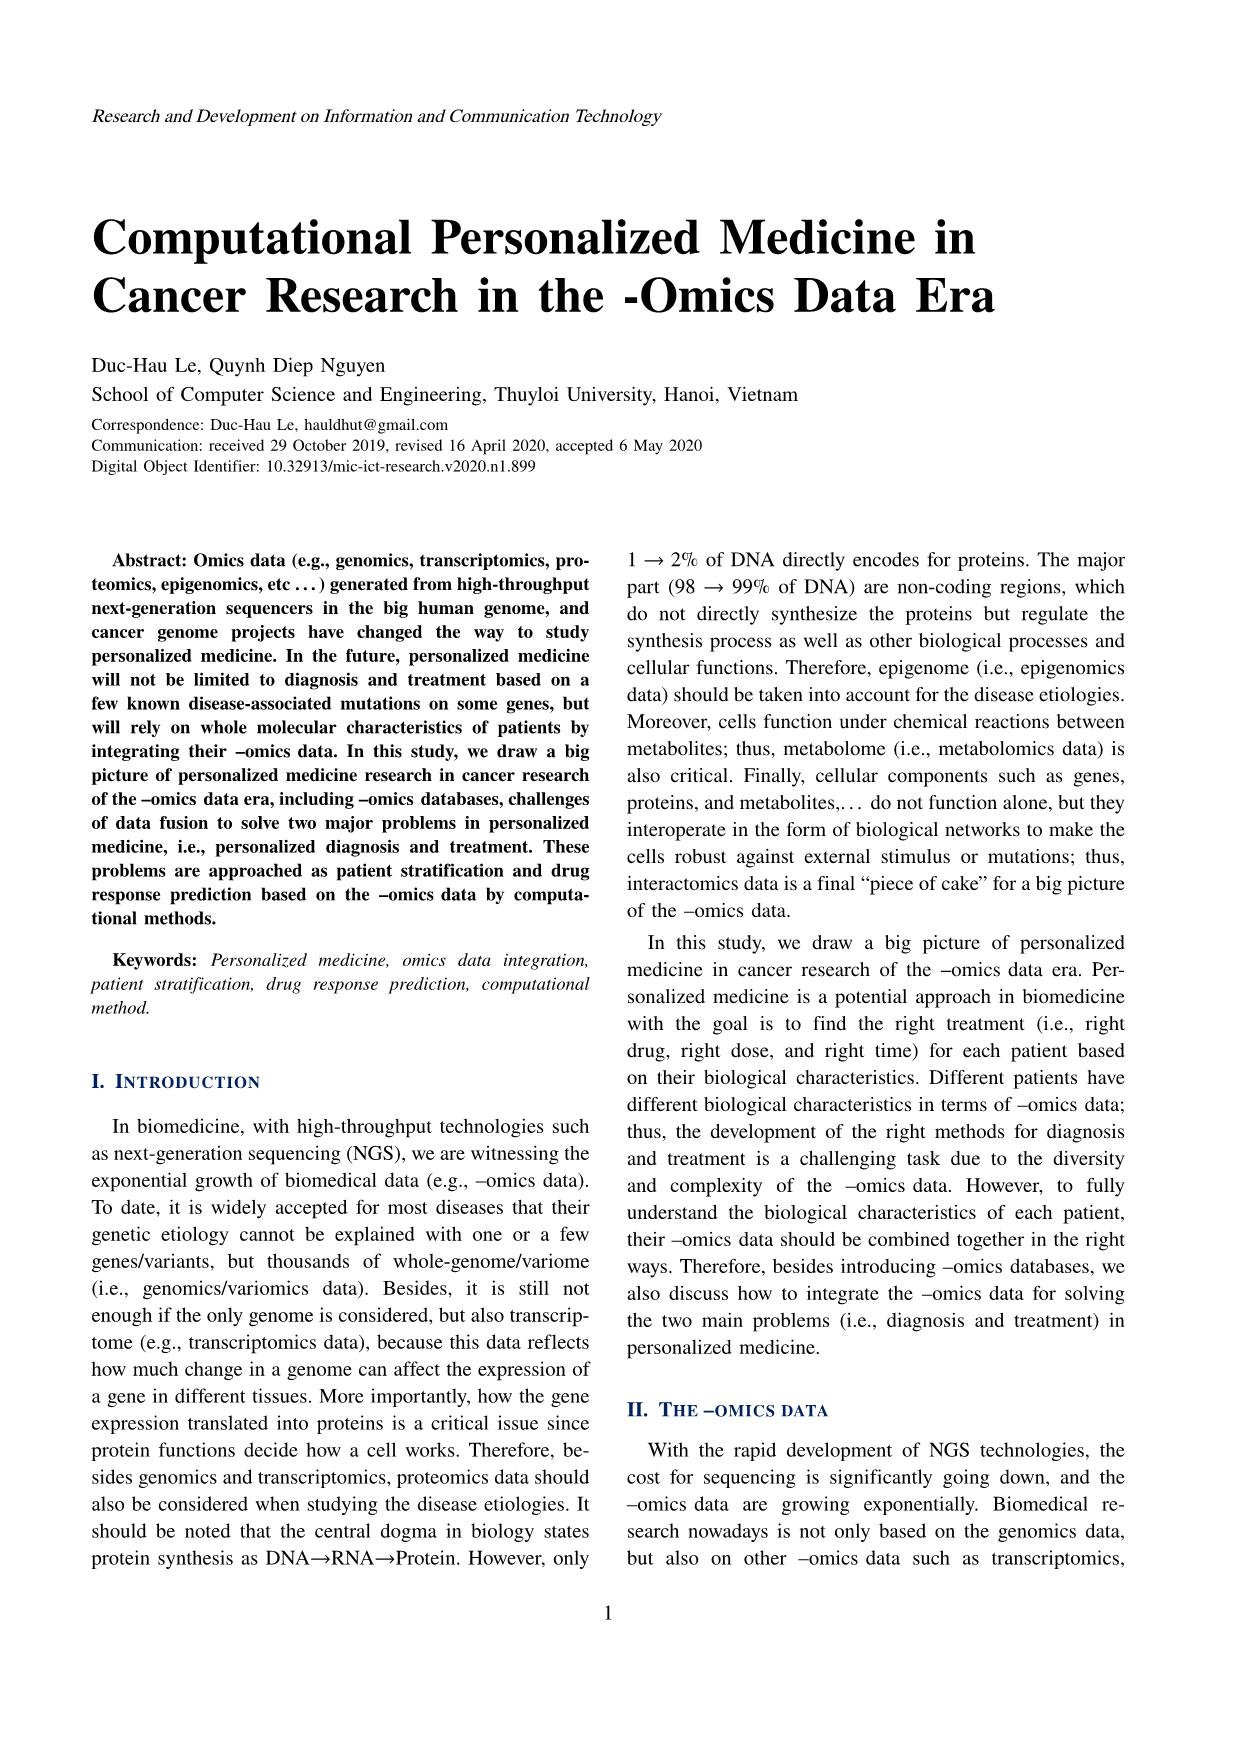 Computational personalized medicine in cancer research in the-omics data era trang 1